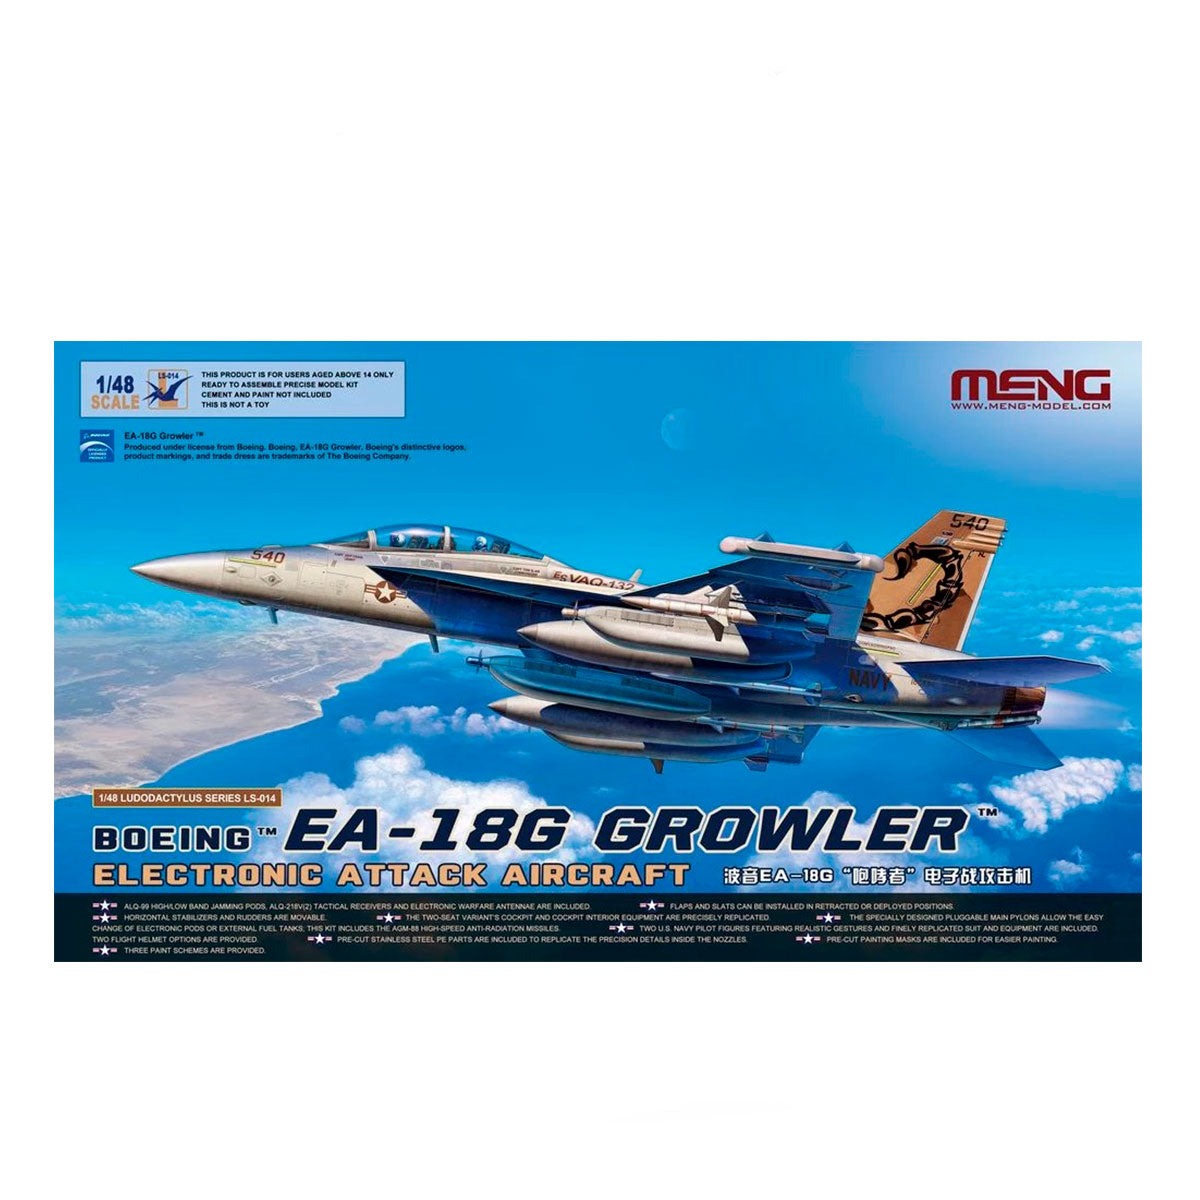 MENG 1/48 Boeing EA-18G Growler Electr. Attack - Loaded Dice Barry Vale of Glamorgan CF64 3HD